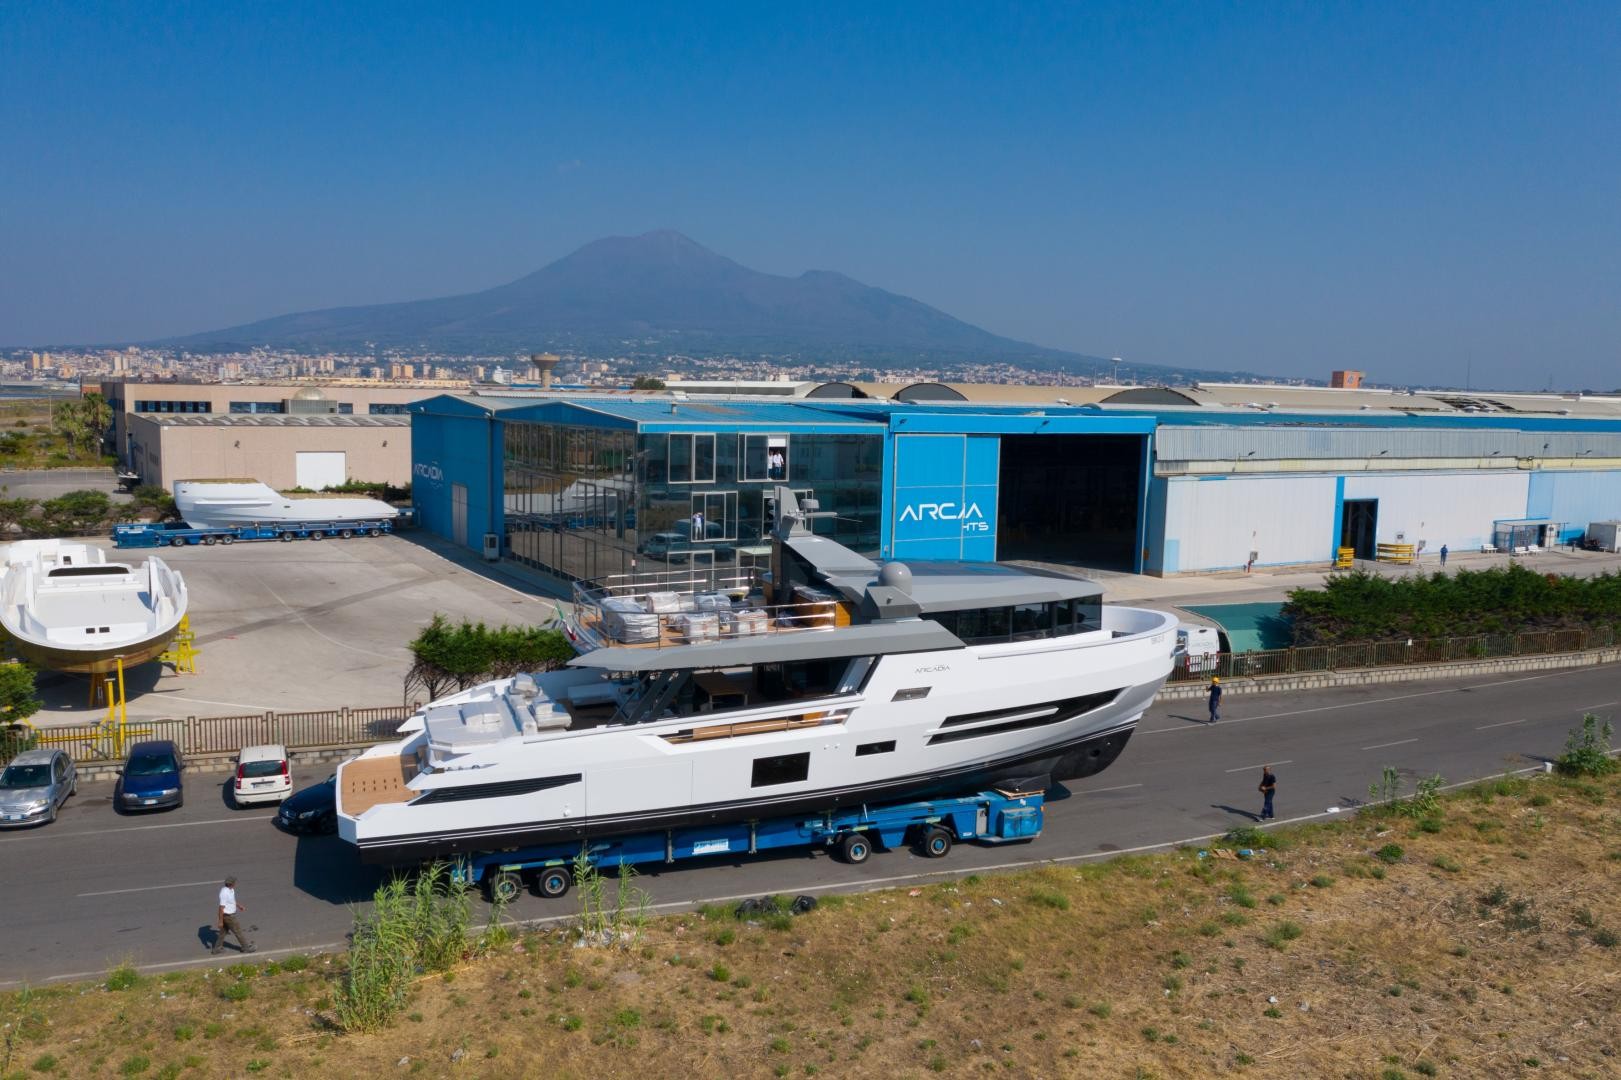 Arcadia Sherpa XL debutto mondiale al Cannes Yachting Festival 2019